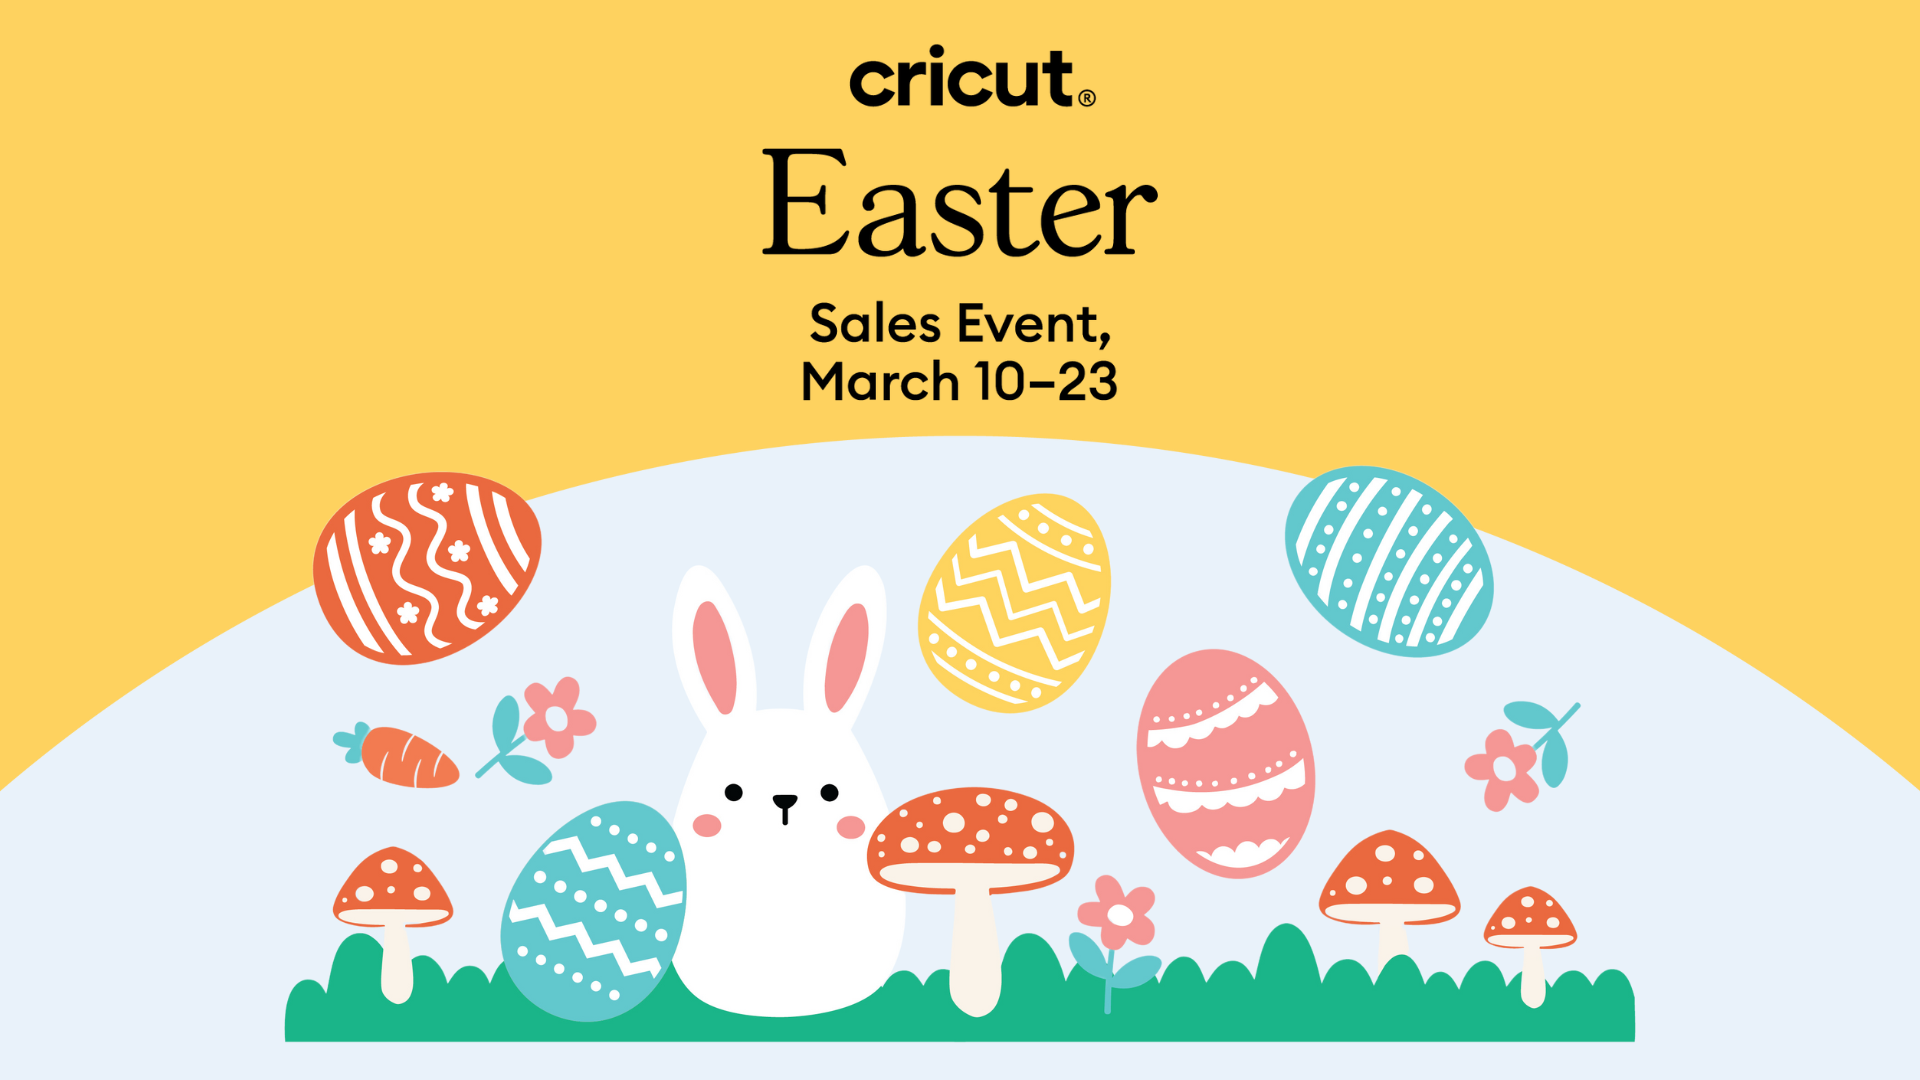 The Cricut Easter Sales Event is here!